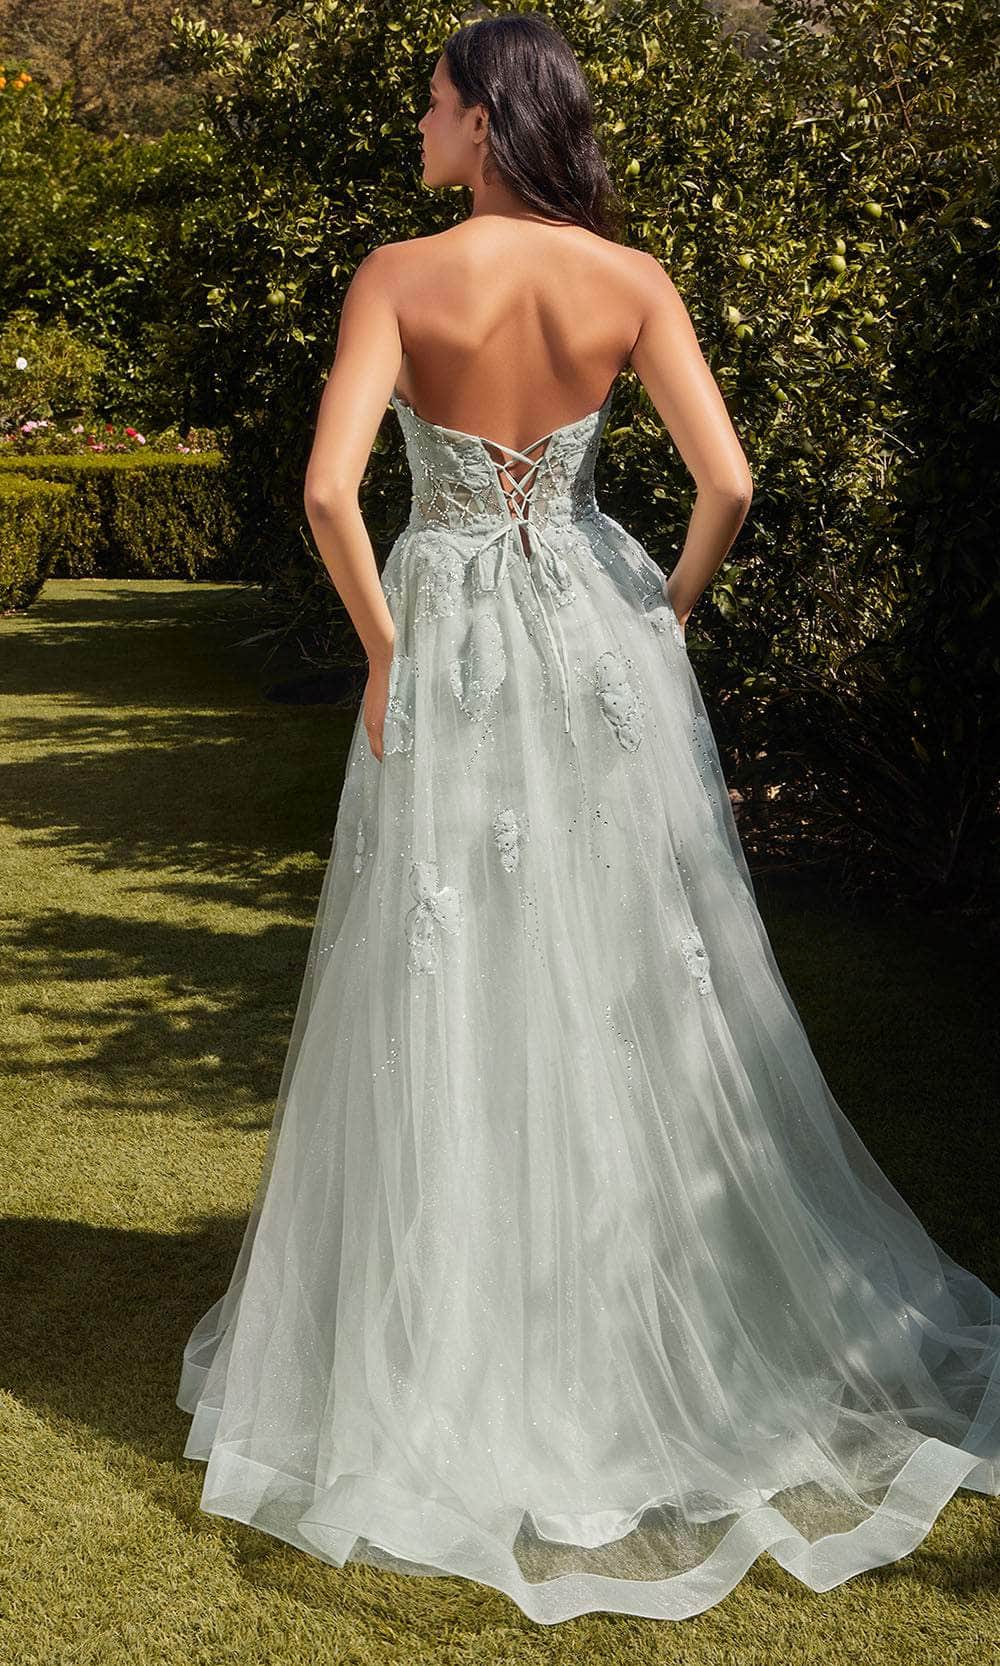 Andrea And Leo A1346 - Strapless Appliqued Evening Dress